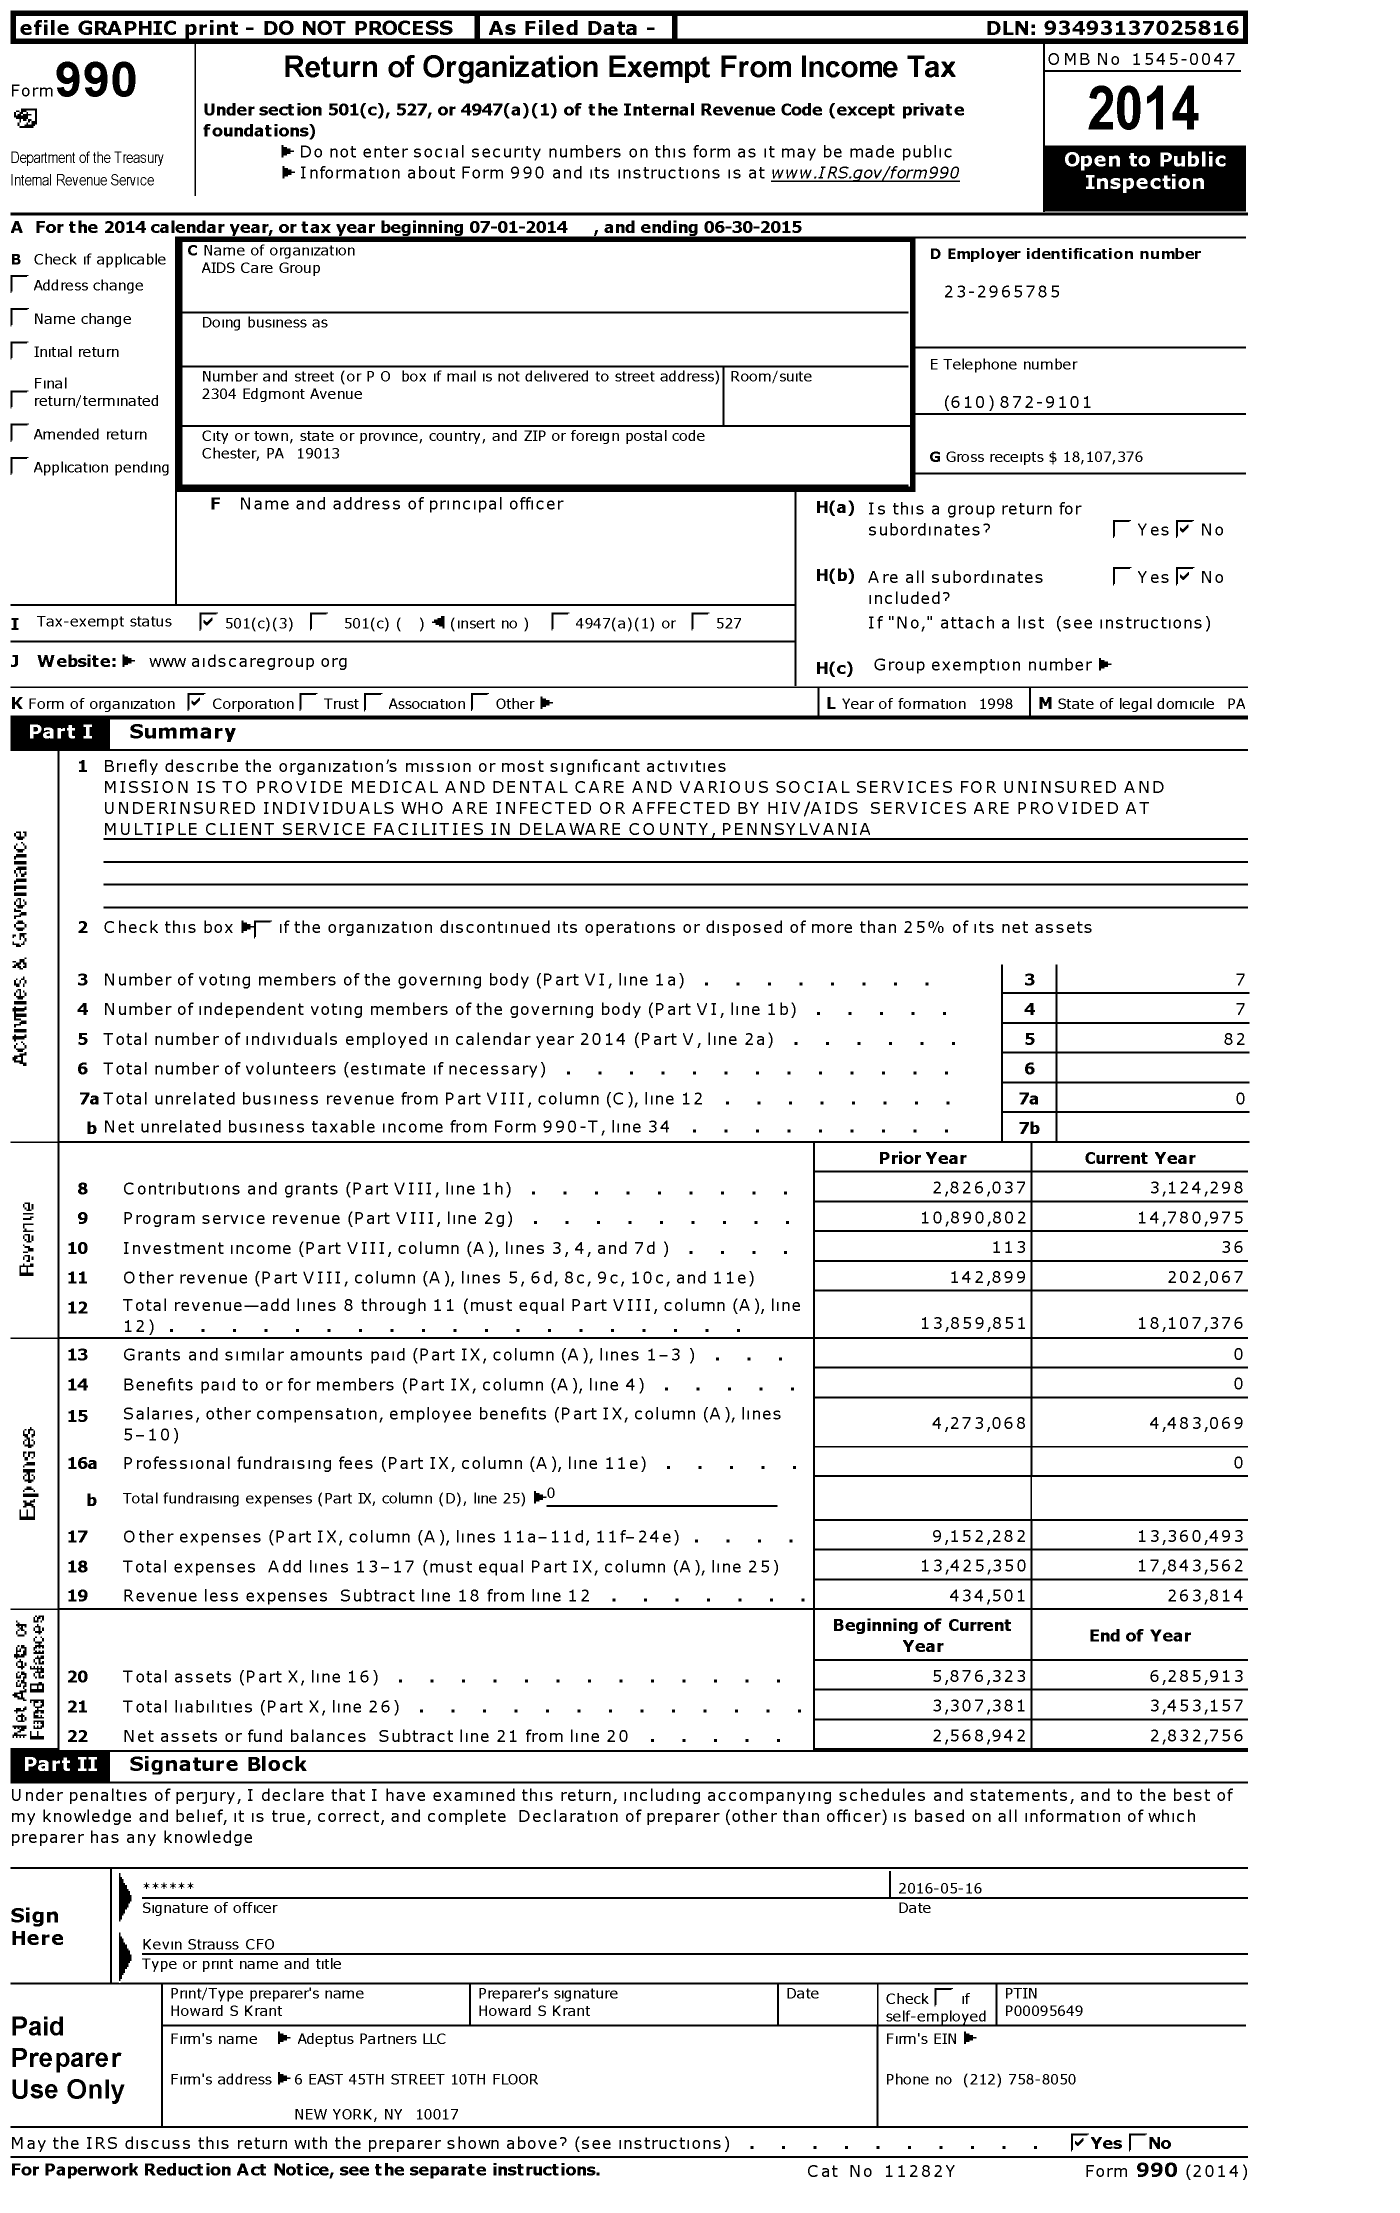 Image of first page of 2014 Form 990 for Aids Care Group (ACG)